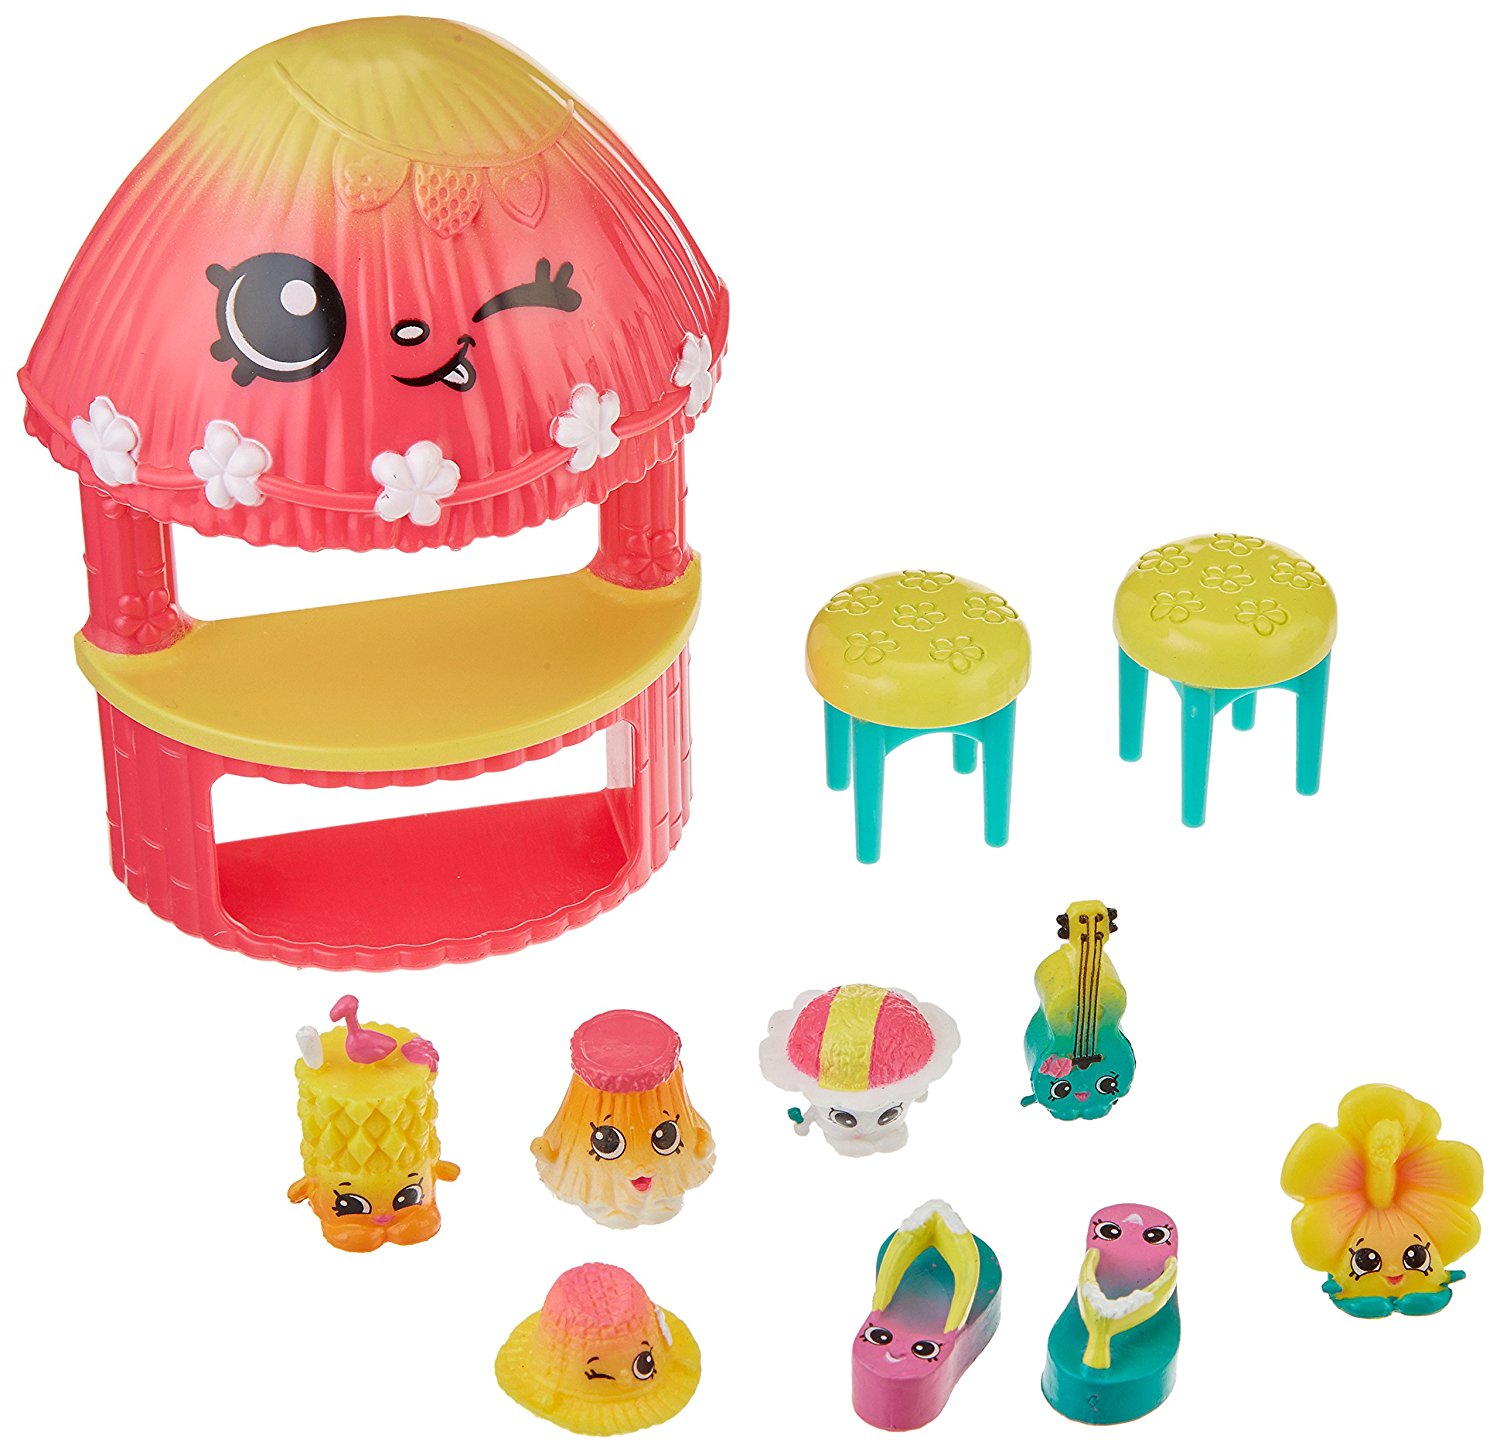 Shopkins S4 Tropical Fashion Pack Collection – Just $6.99!